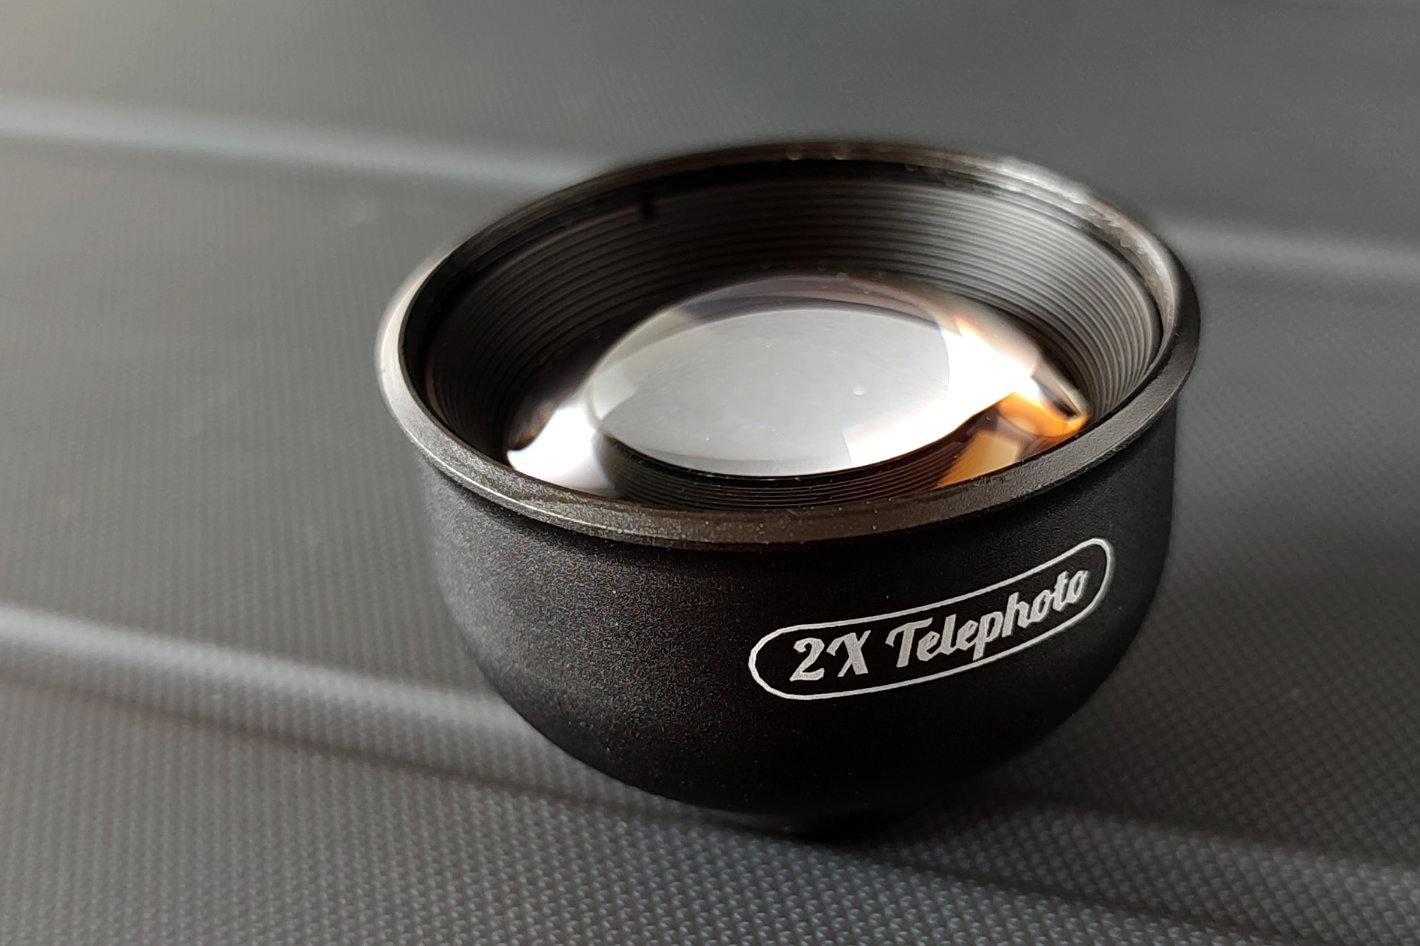 Should you buy a telephoto for your smartphone? by Jose Antunes